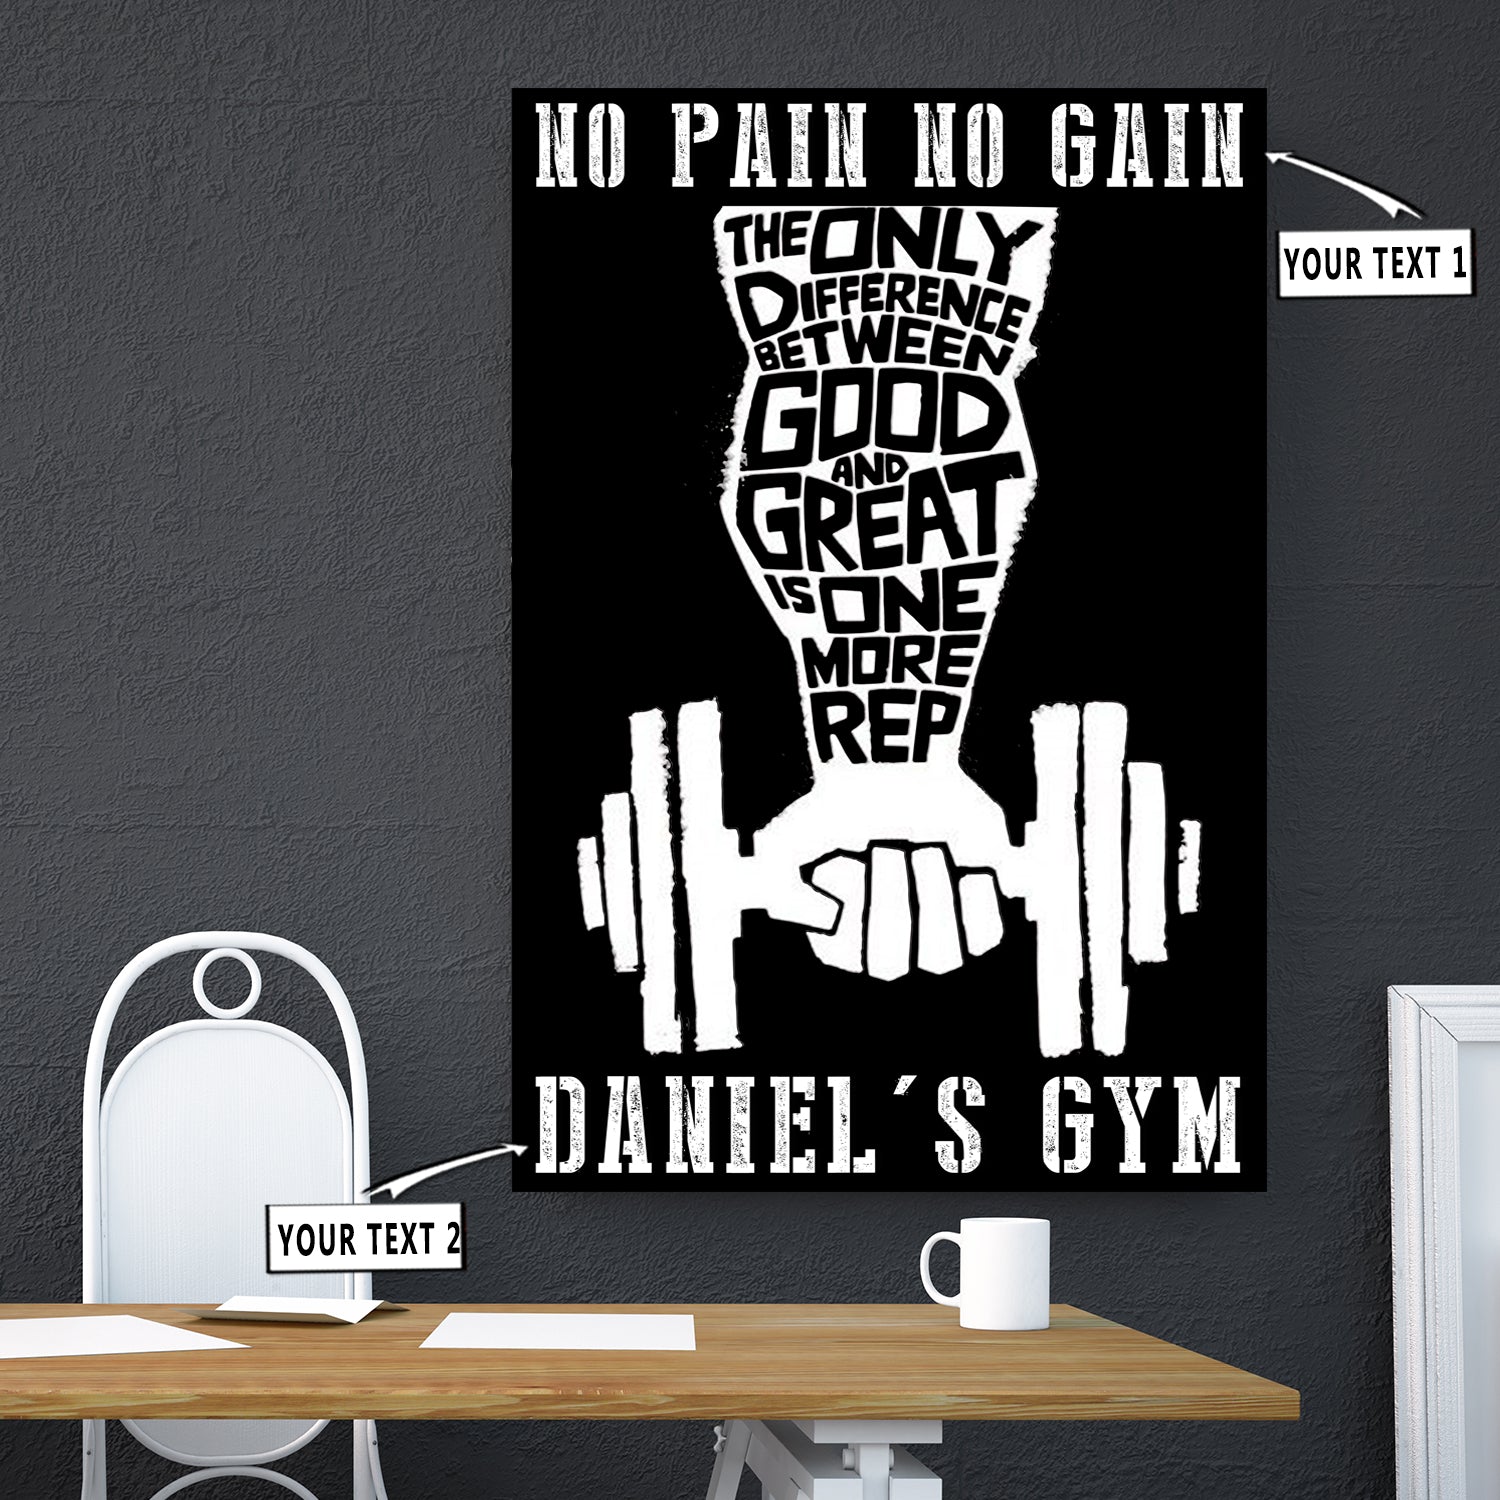 Personalized Gym Poster Canvas Wall Art Home Gym Decor Motivational Quotes